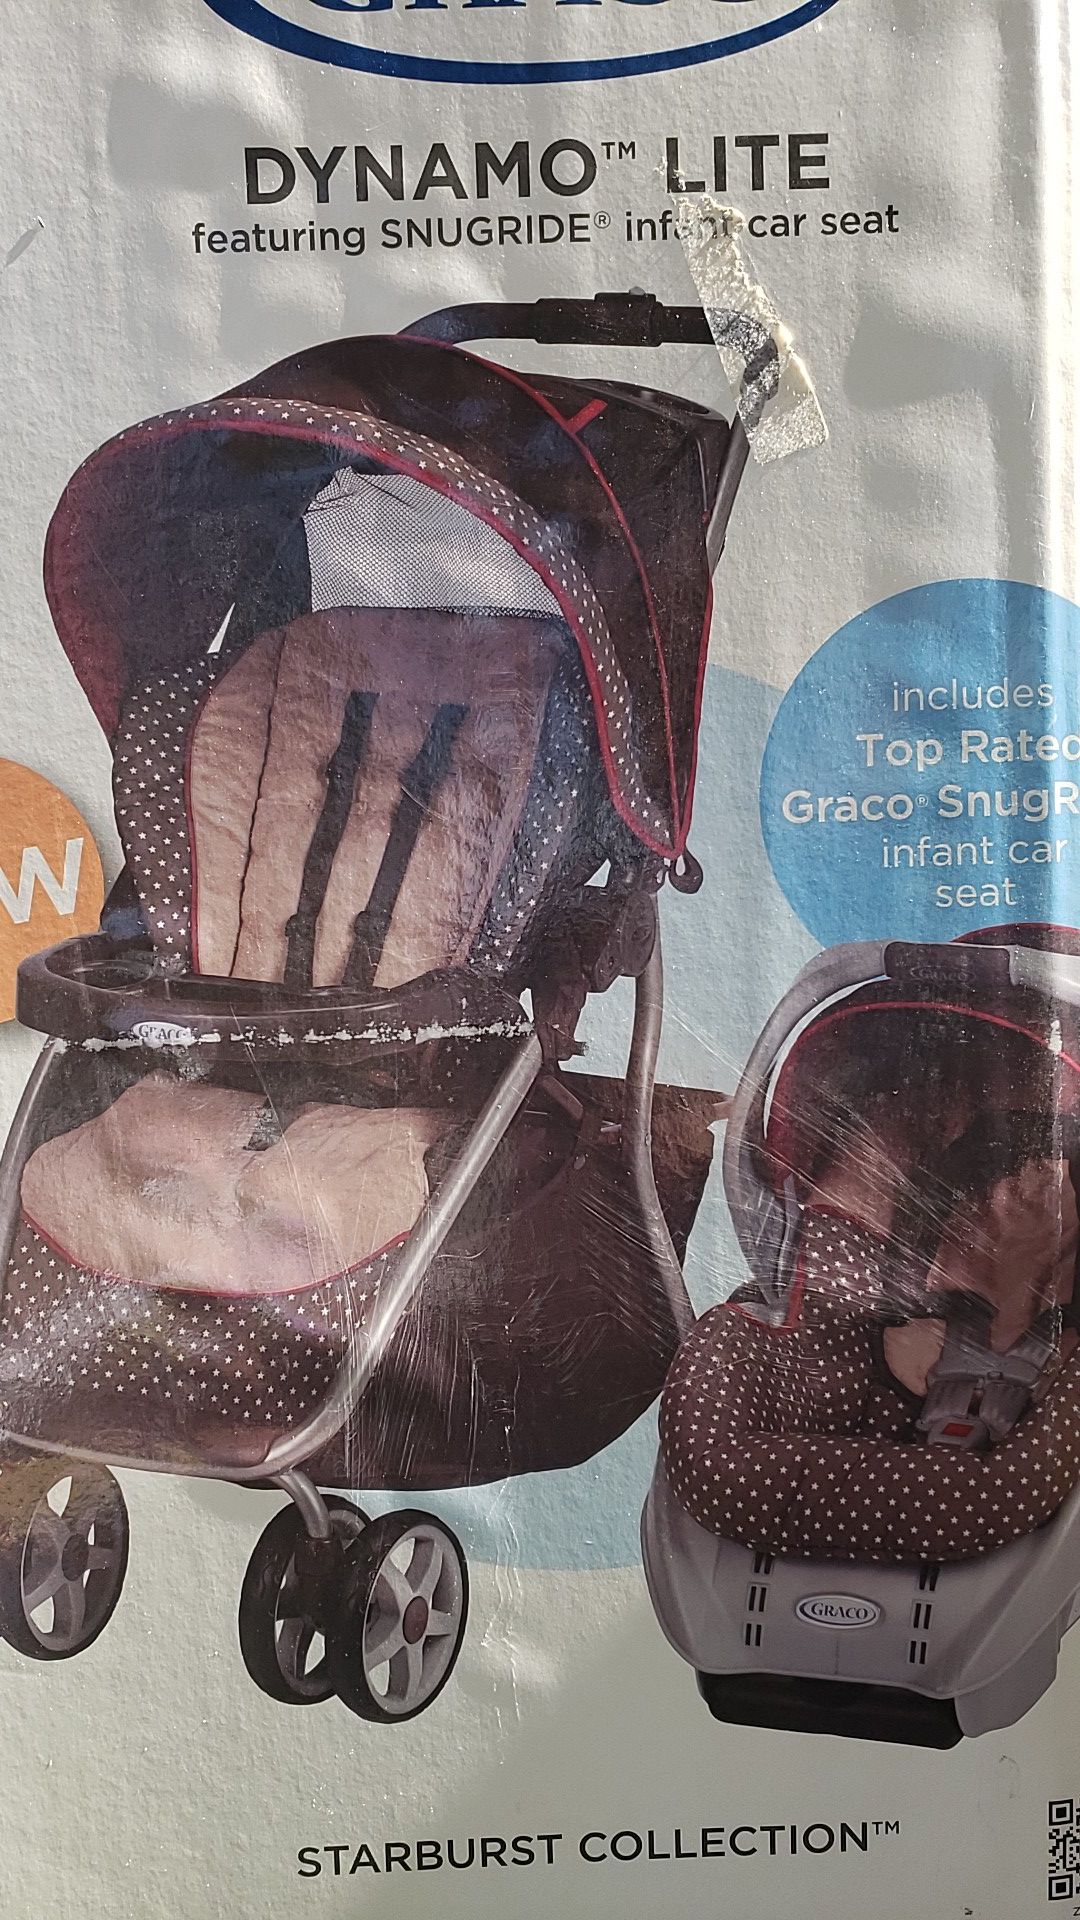 Graco car seat and stroller brand new